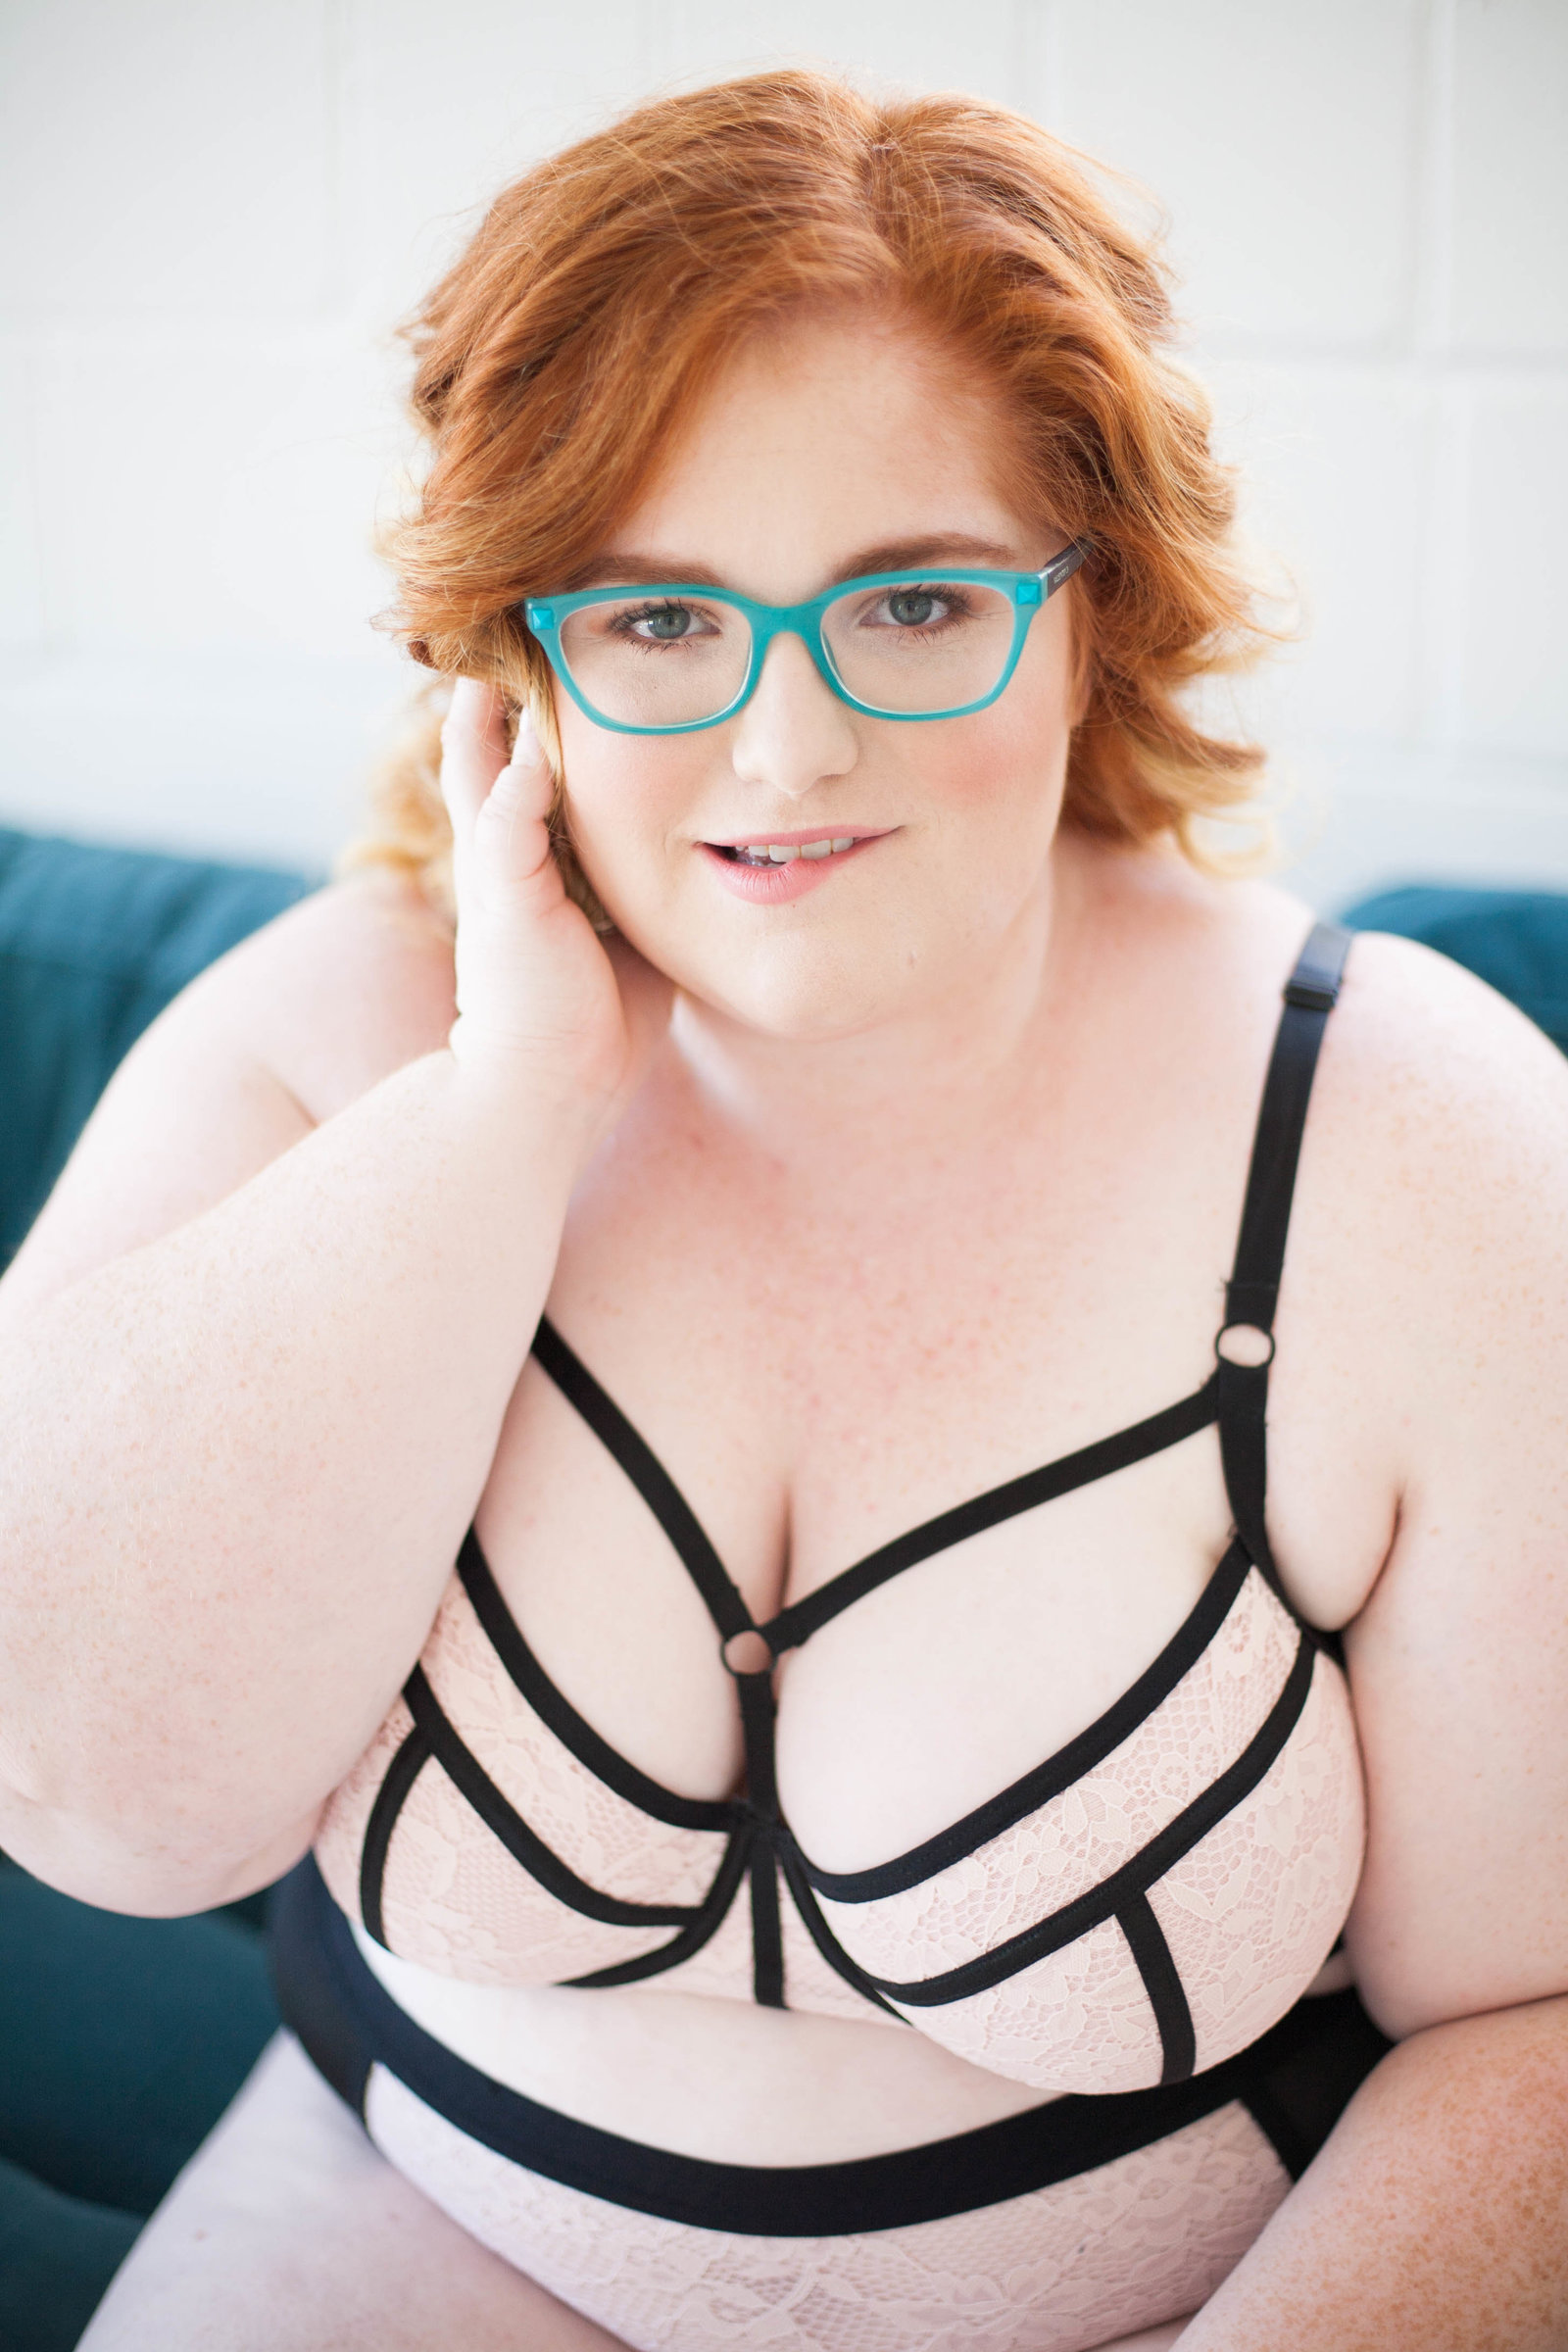 A redhead wearing white and black lingerie.